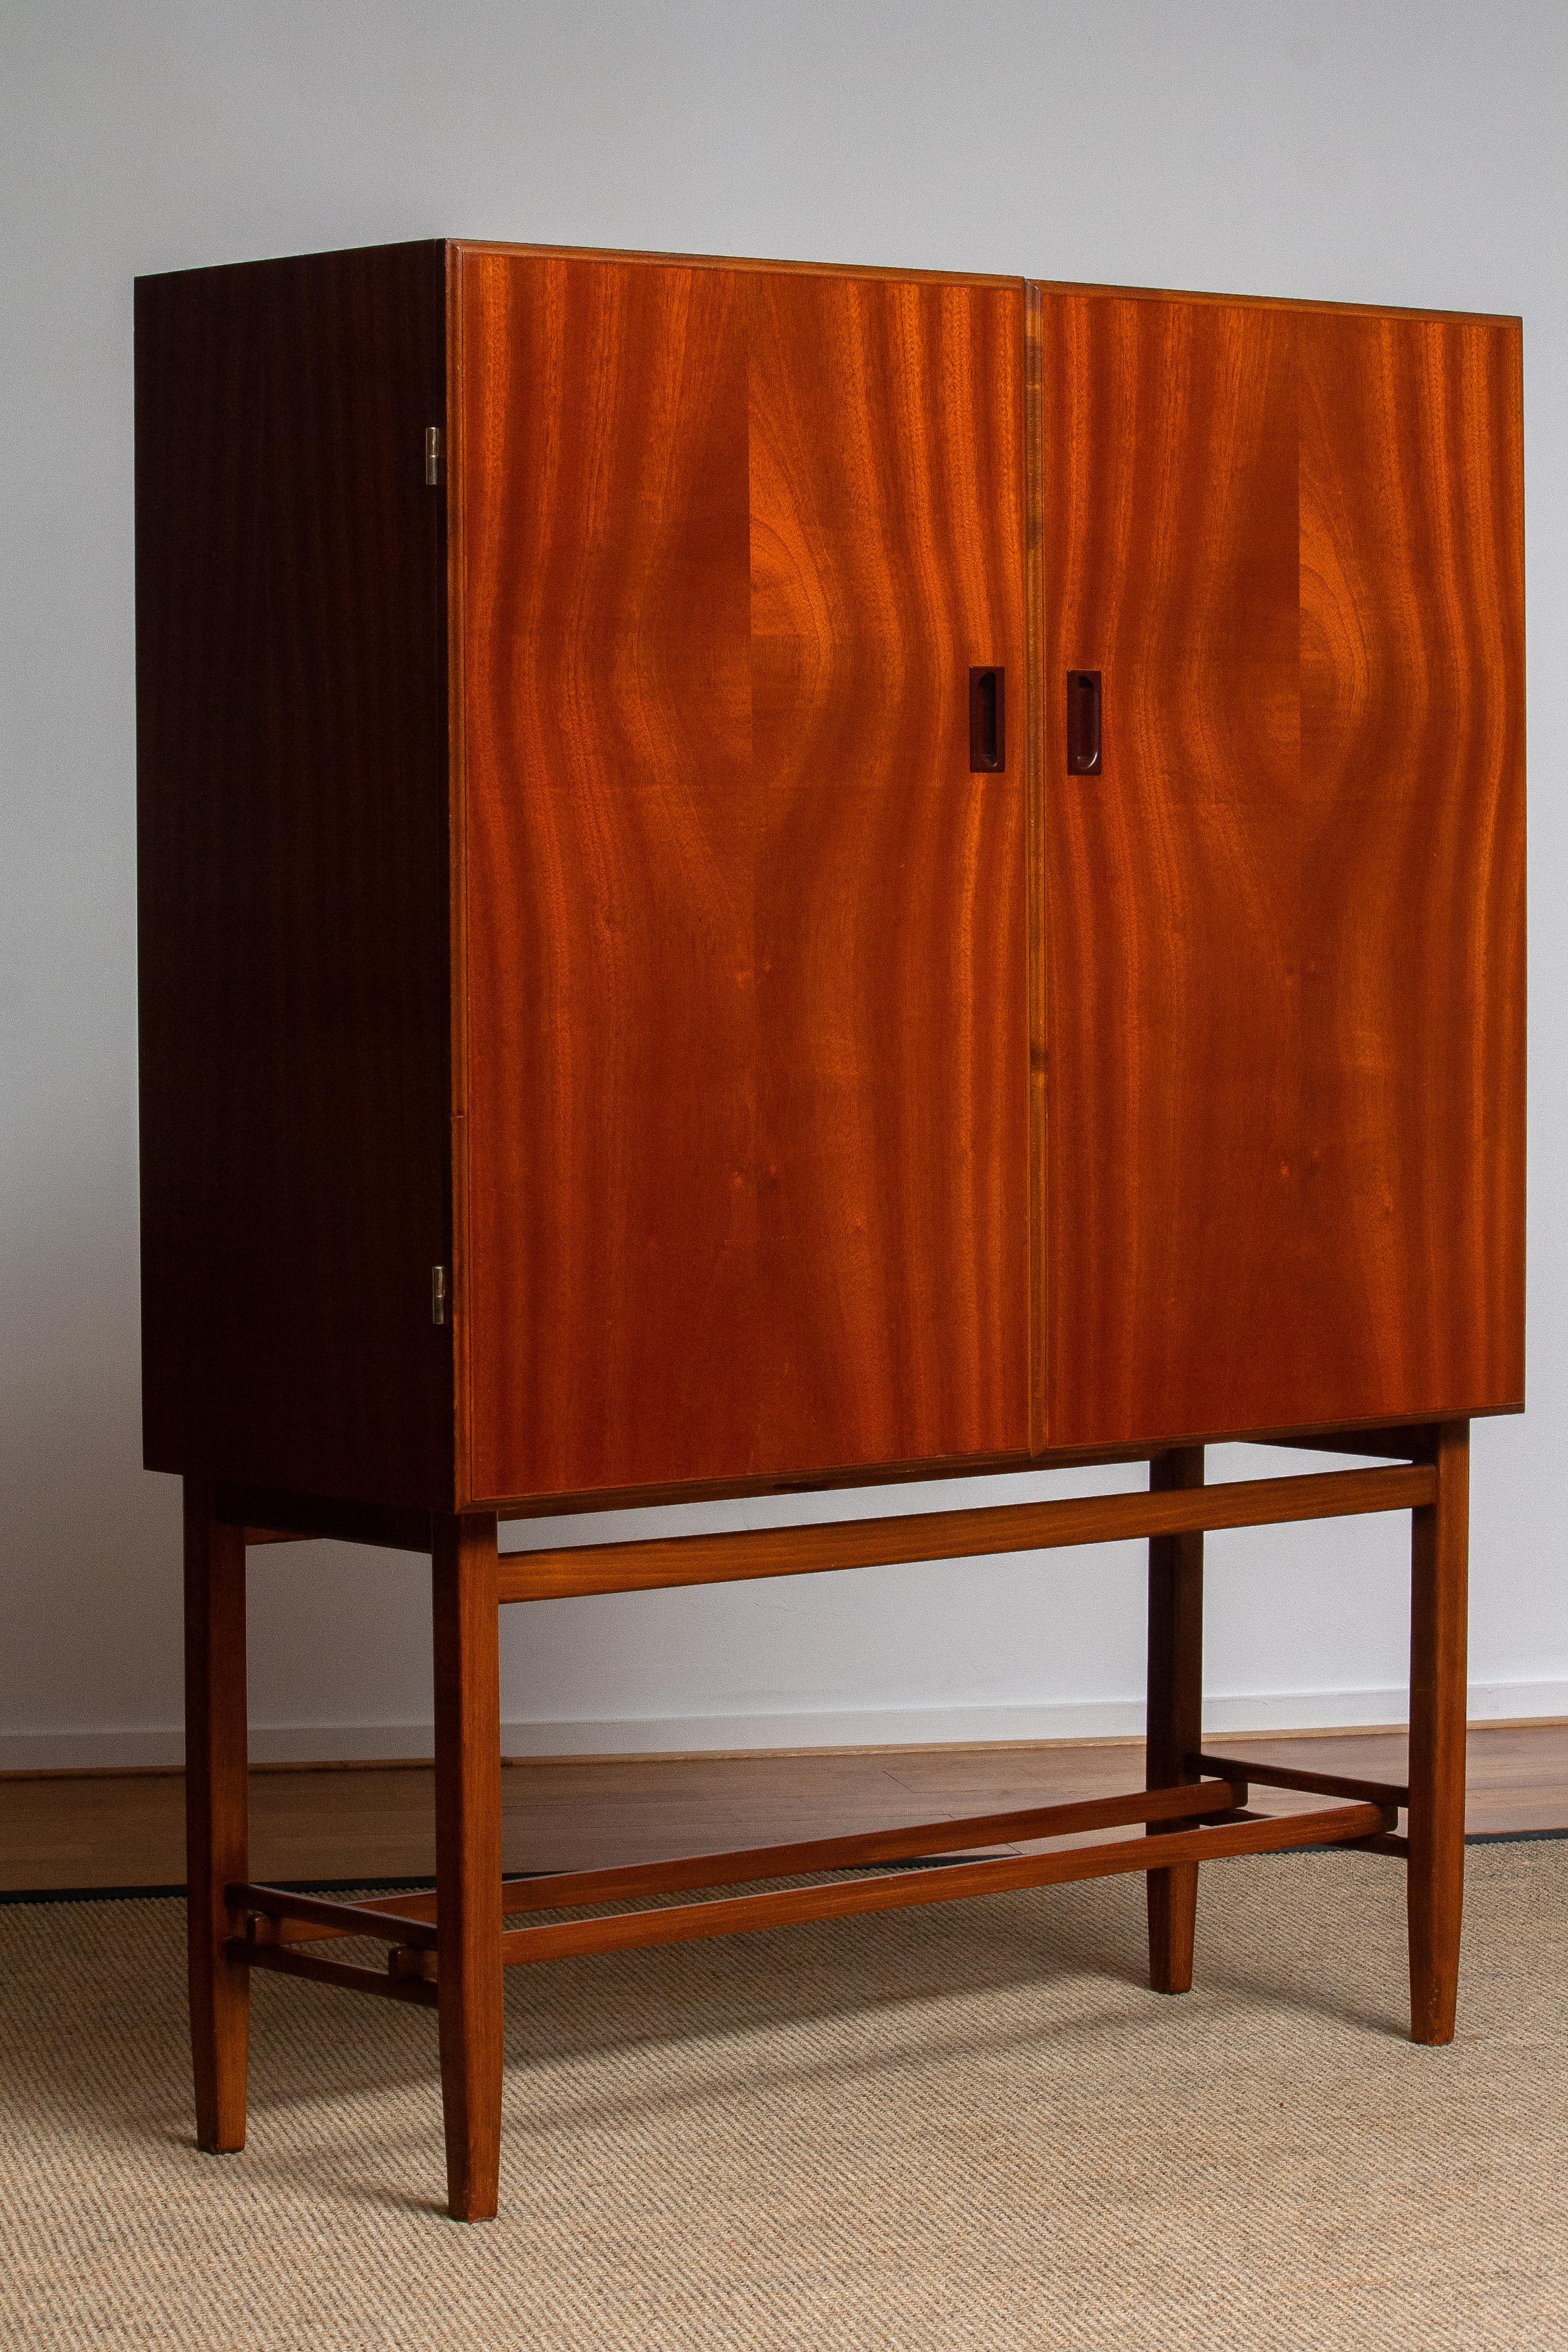 1950s, Slim Midcentury Mahogany Dry Bar or Cabinet by Forenades Mobler, Sweden 1